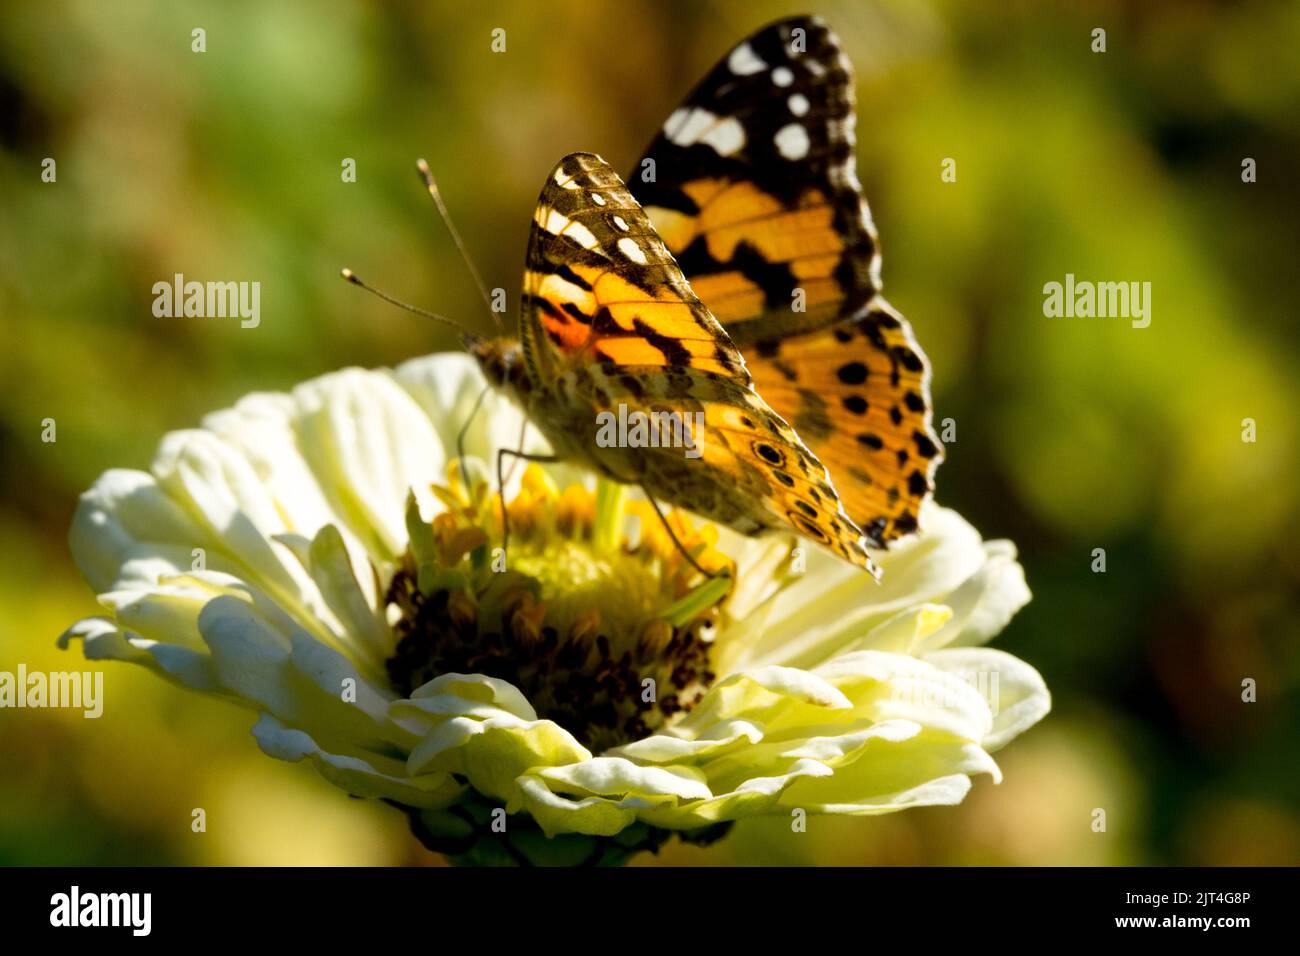 Butterfly on White Zinnia elegans Painted lady butterfly Vanessa cardui Butterfly Feeding Nectar from flower Stock Photo